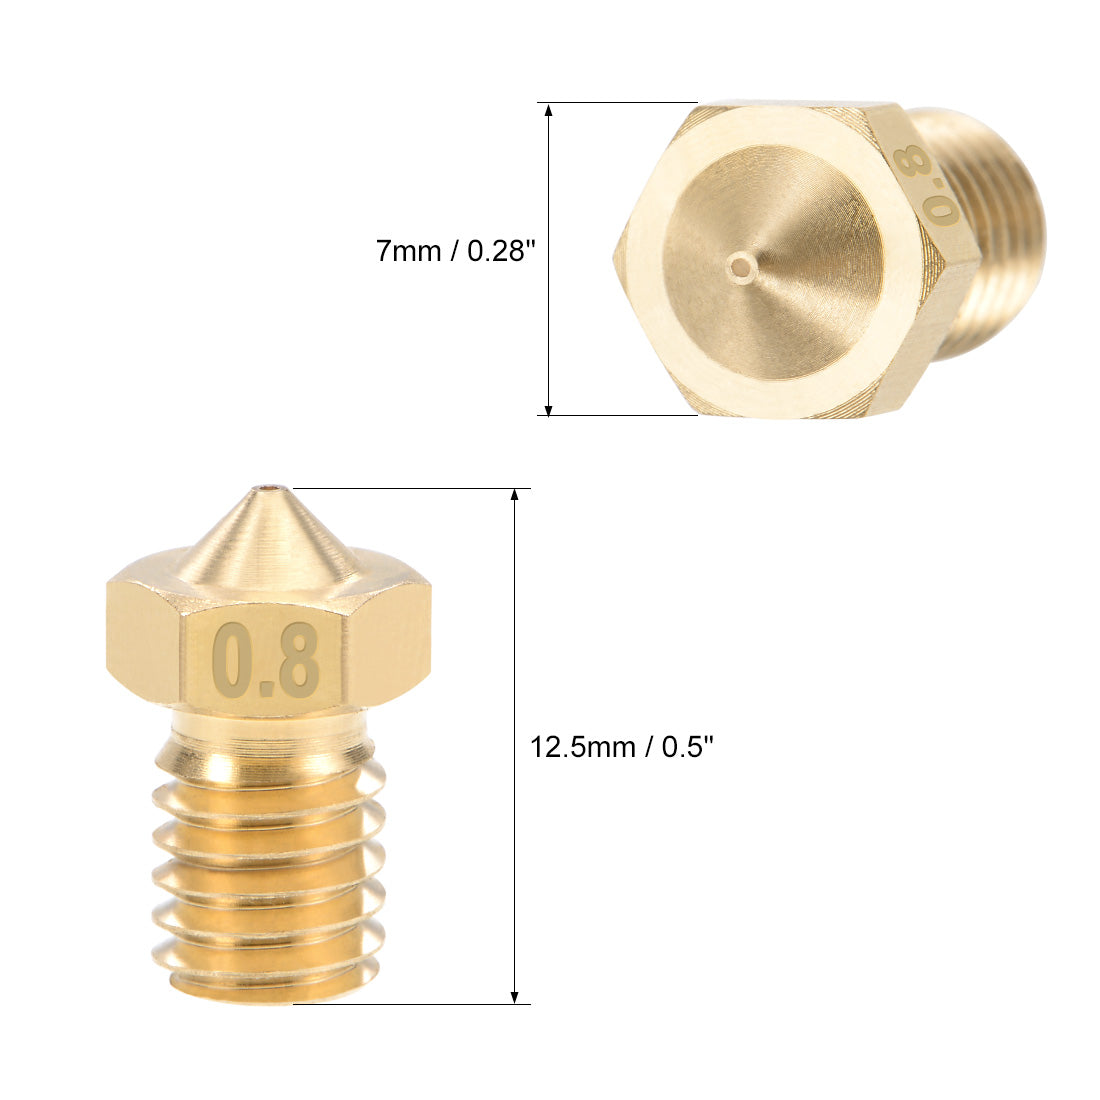 uxcell Uxcell 0.8mm 3D Printer Nozzle Head M6 Kits for Extruder Print, Brass 10pcs